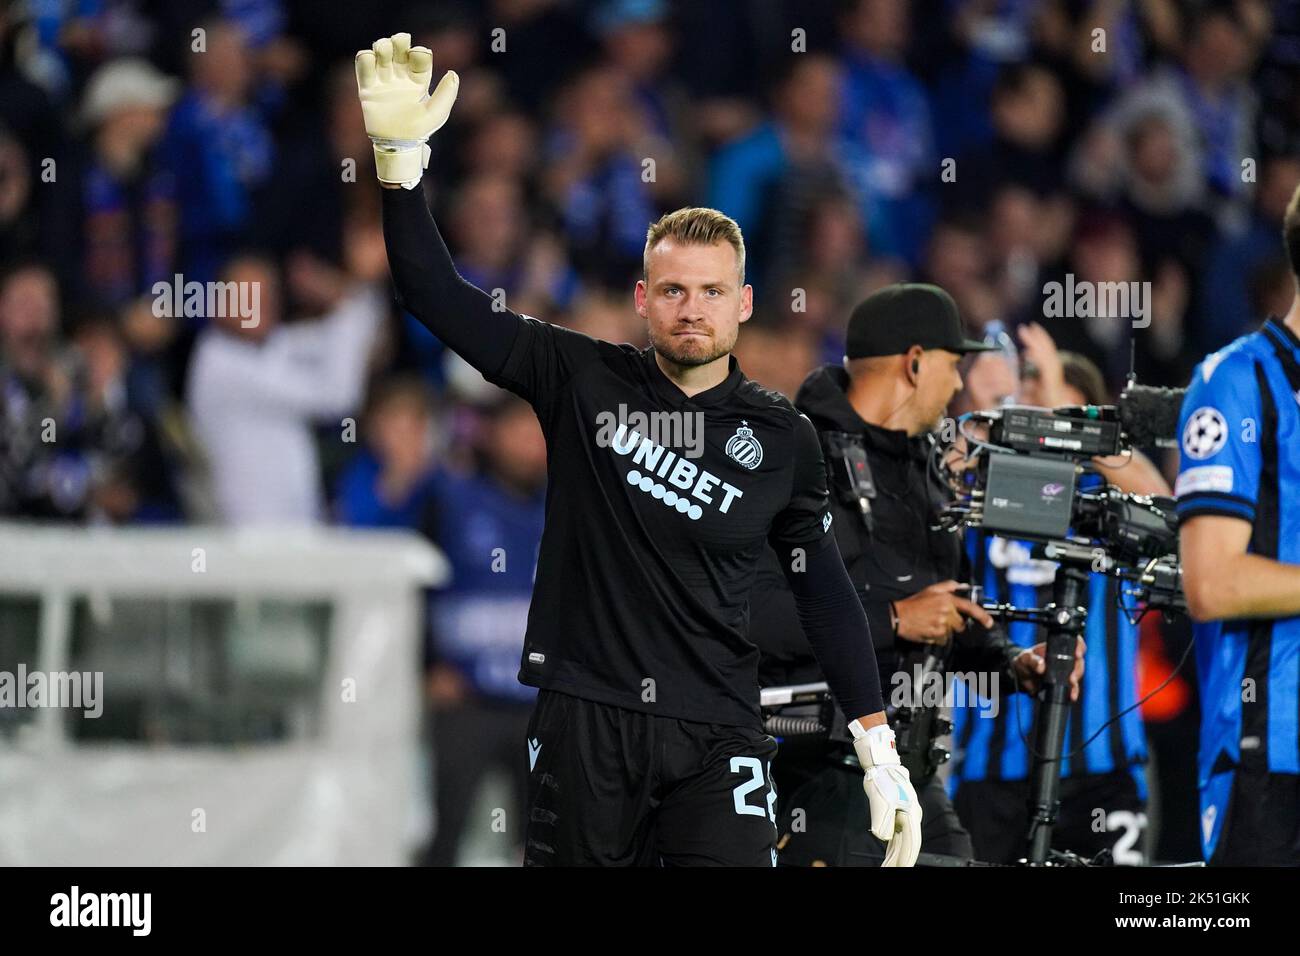 BRUGGES, BELGIUM - OCTOBER 4: Simon Mignolet of Club Brugge KV applauds for the fans after the Group B - UEFA Champions League match between Club Brugge KV and Atletico Madrid at the Jan Breydelstadion on October 4, 2022 in Brugges, Belgium (Photo by Joris Verwijst/Orange Pictures) Stock Photo